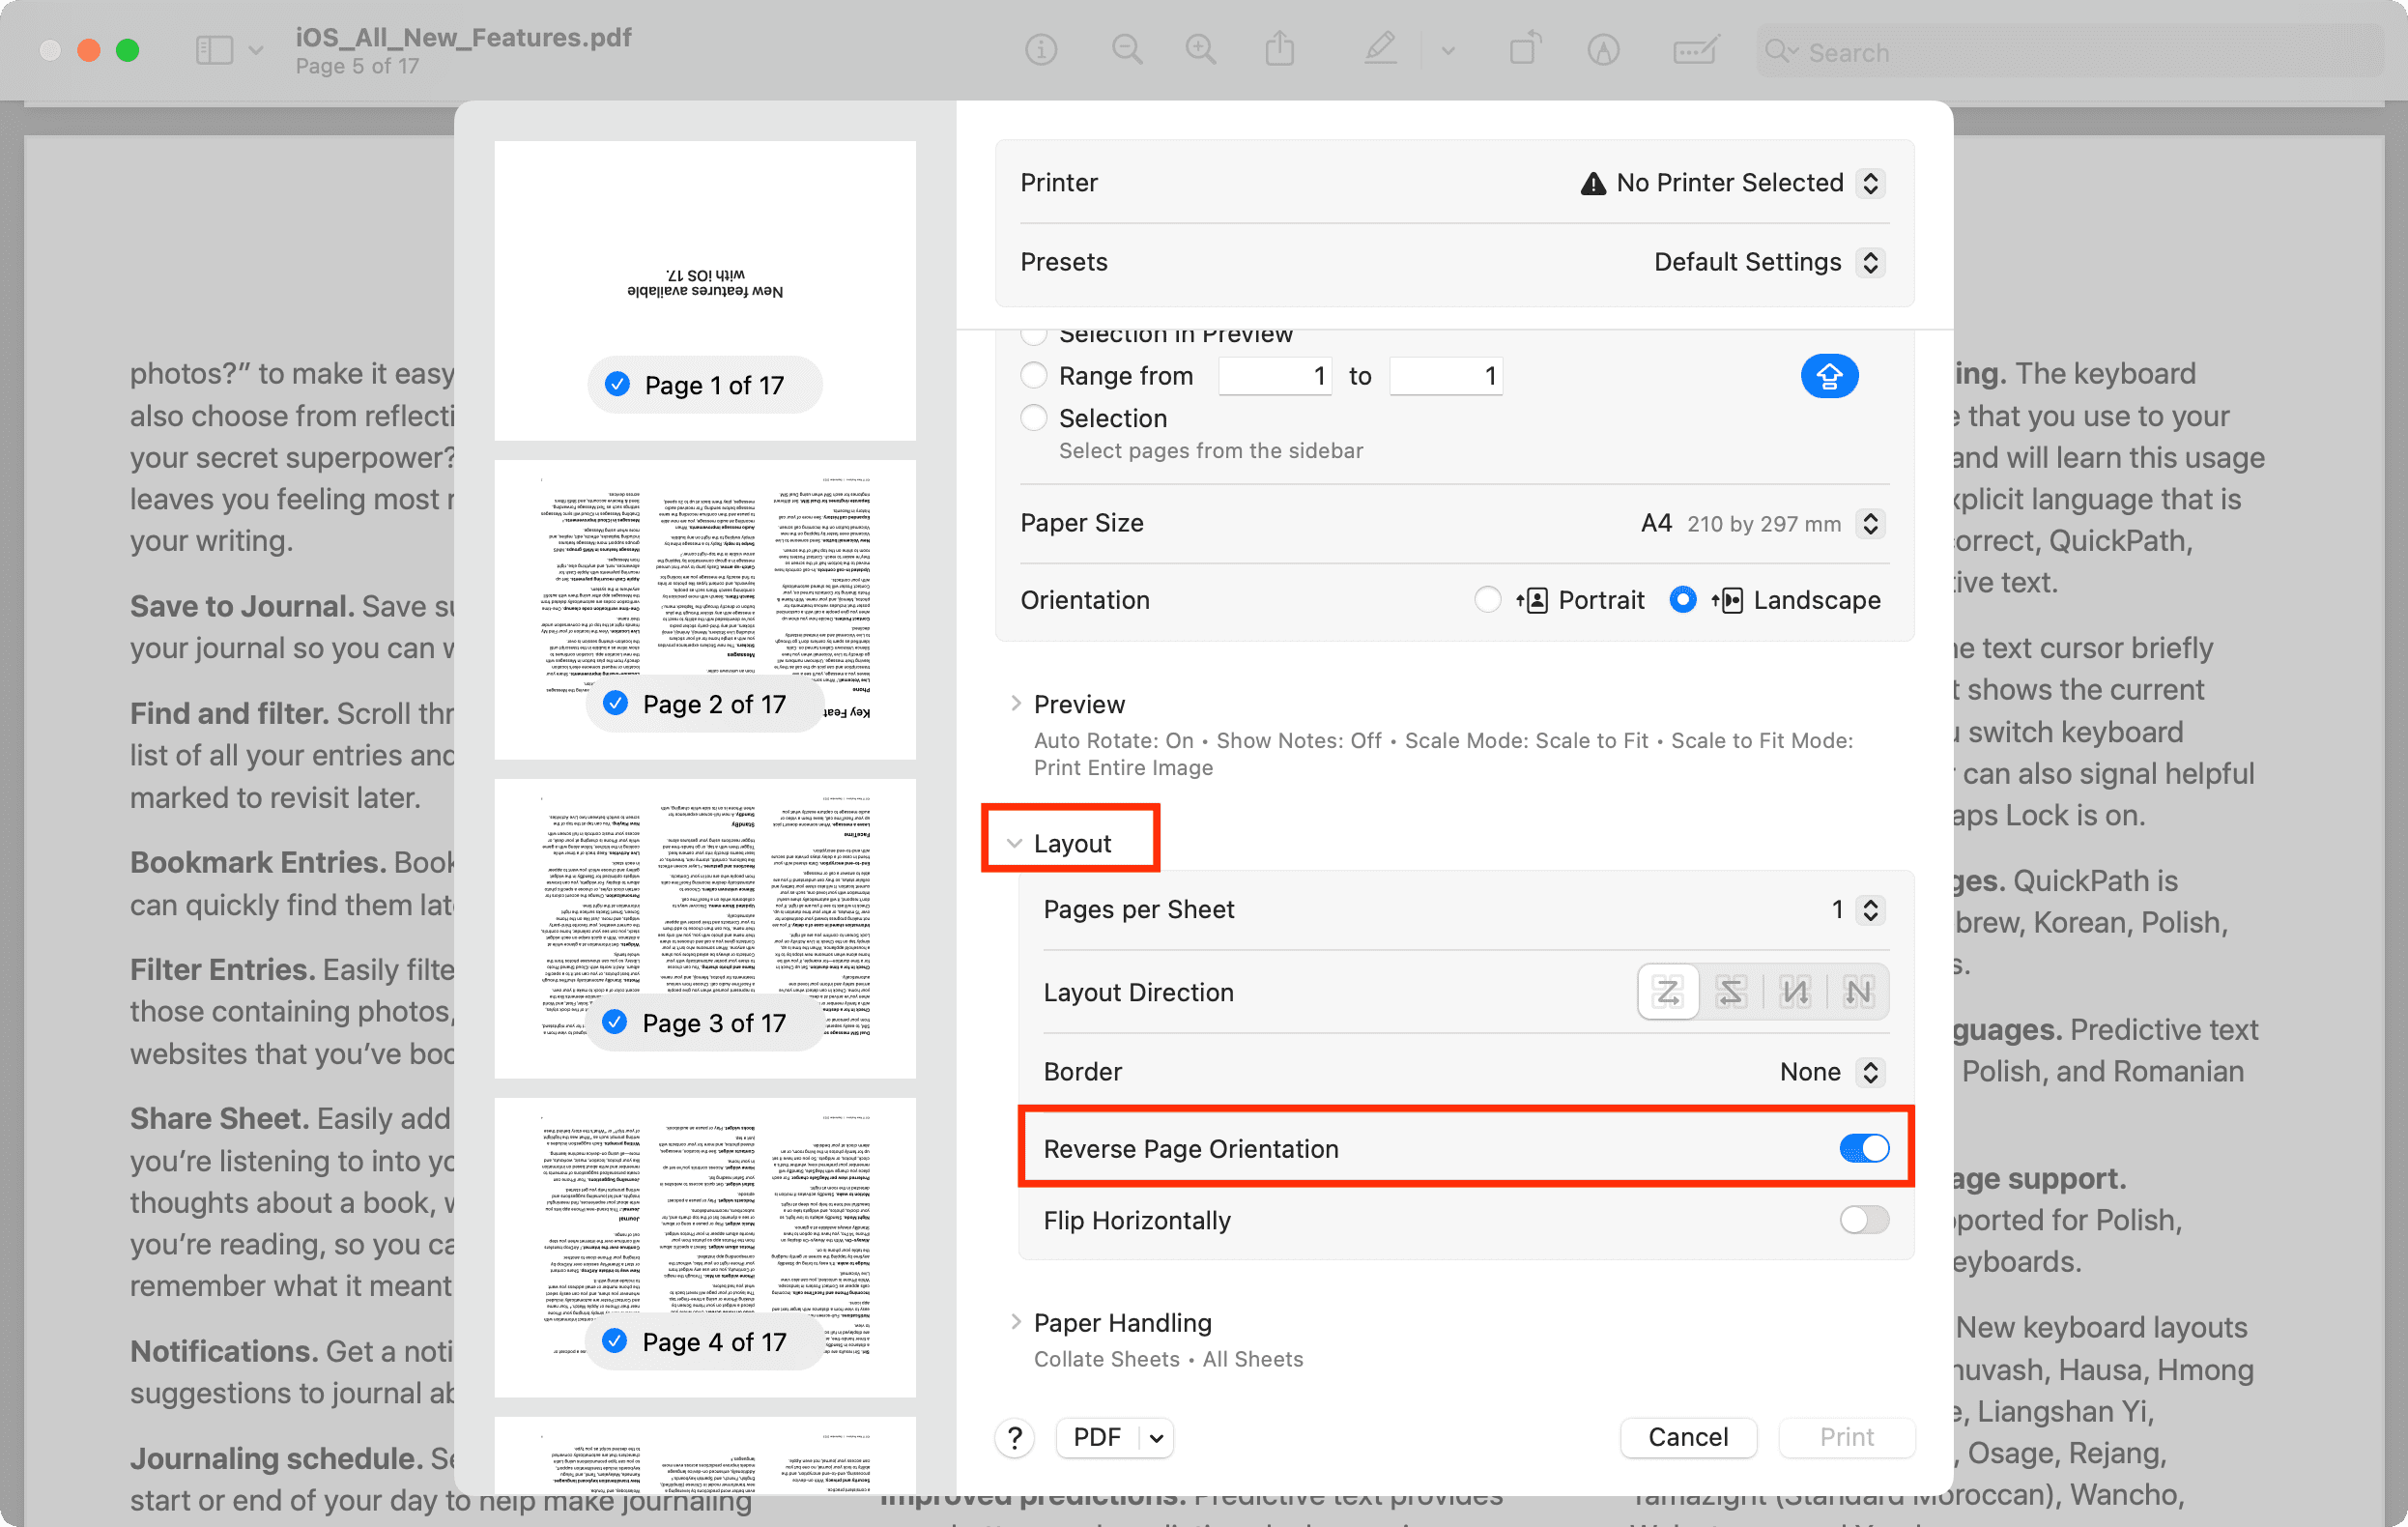 Reverse Page Orientation during Print on Mac